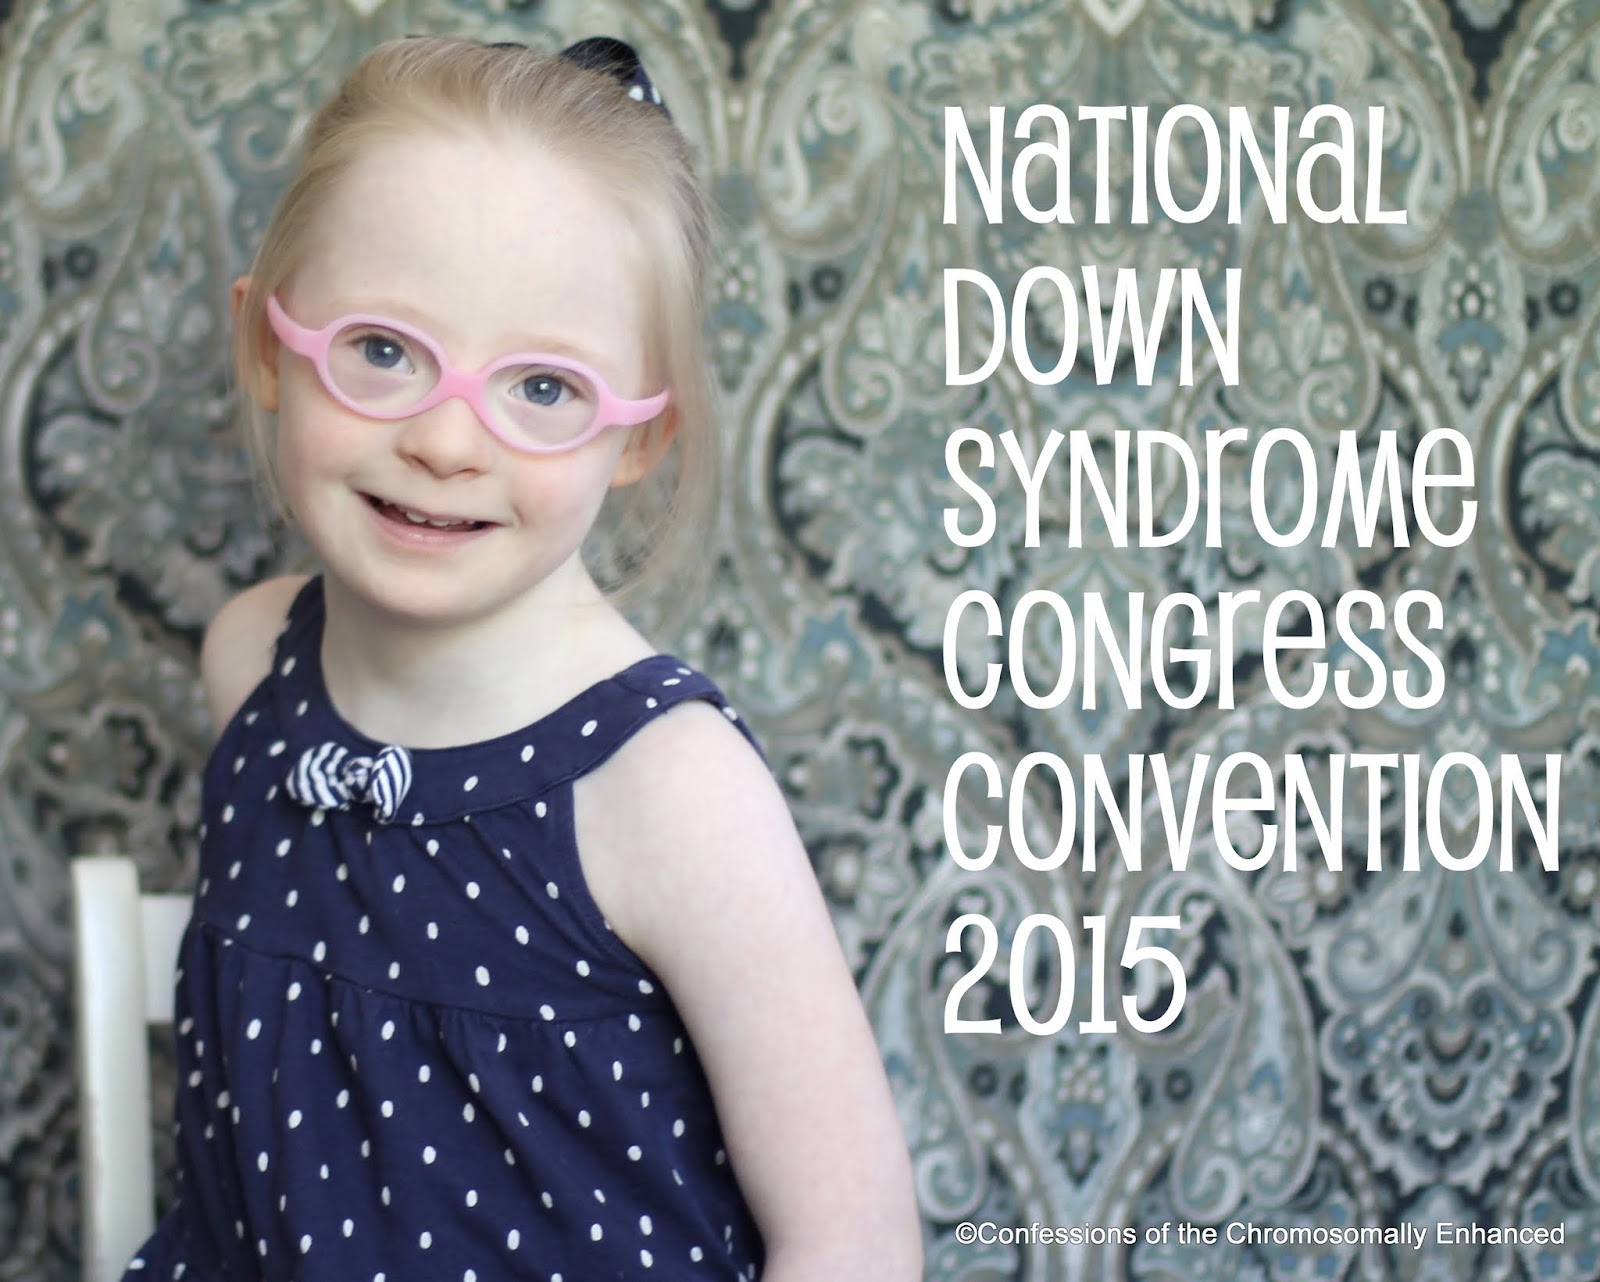 Confessions of the Chromosomally Enhanced National Down Syndrome